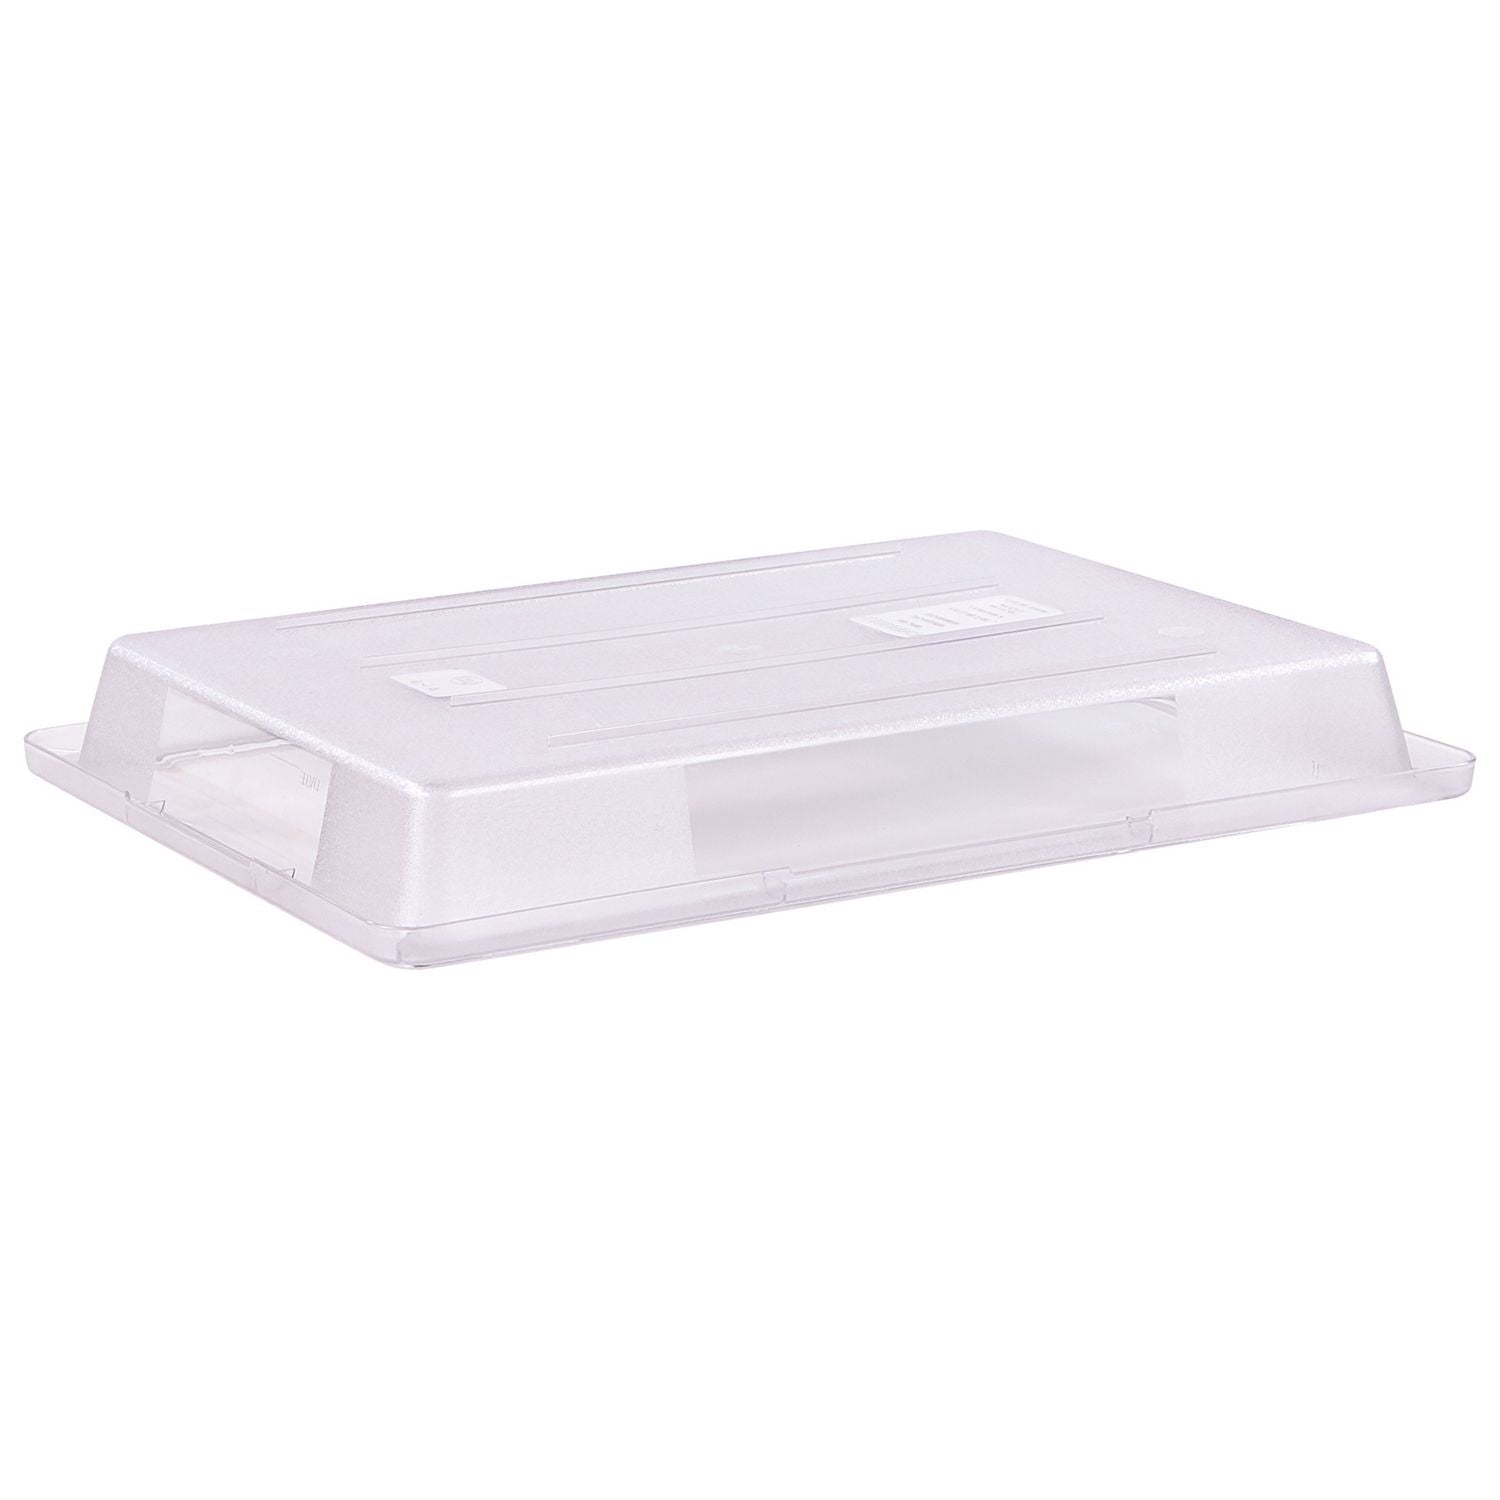 storplus-polycarbonate-food-storage-container-5-gal-18-x-26-x-35-clear-plastic_cfs1062007 - 2